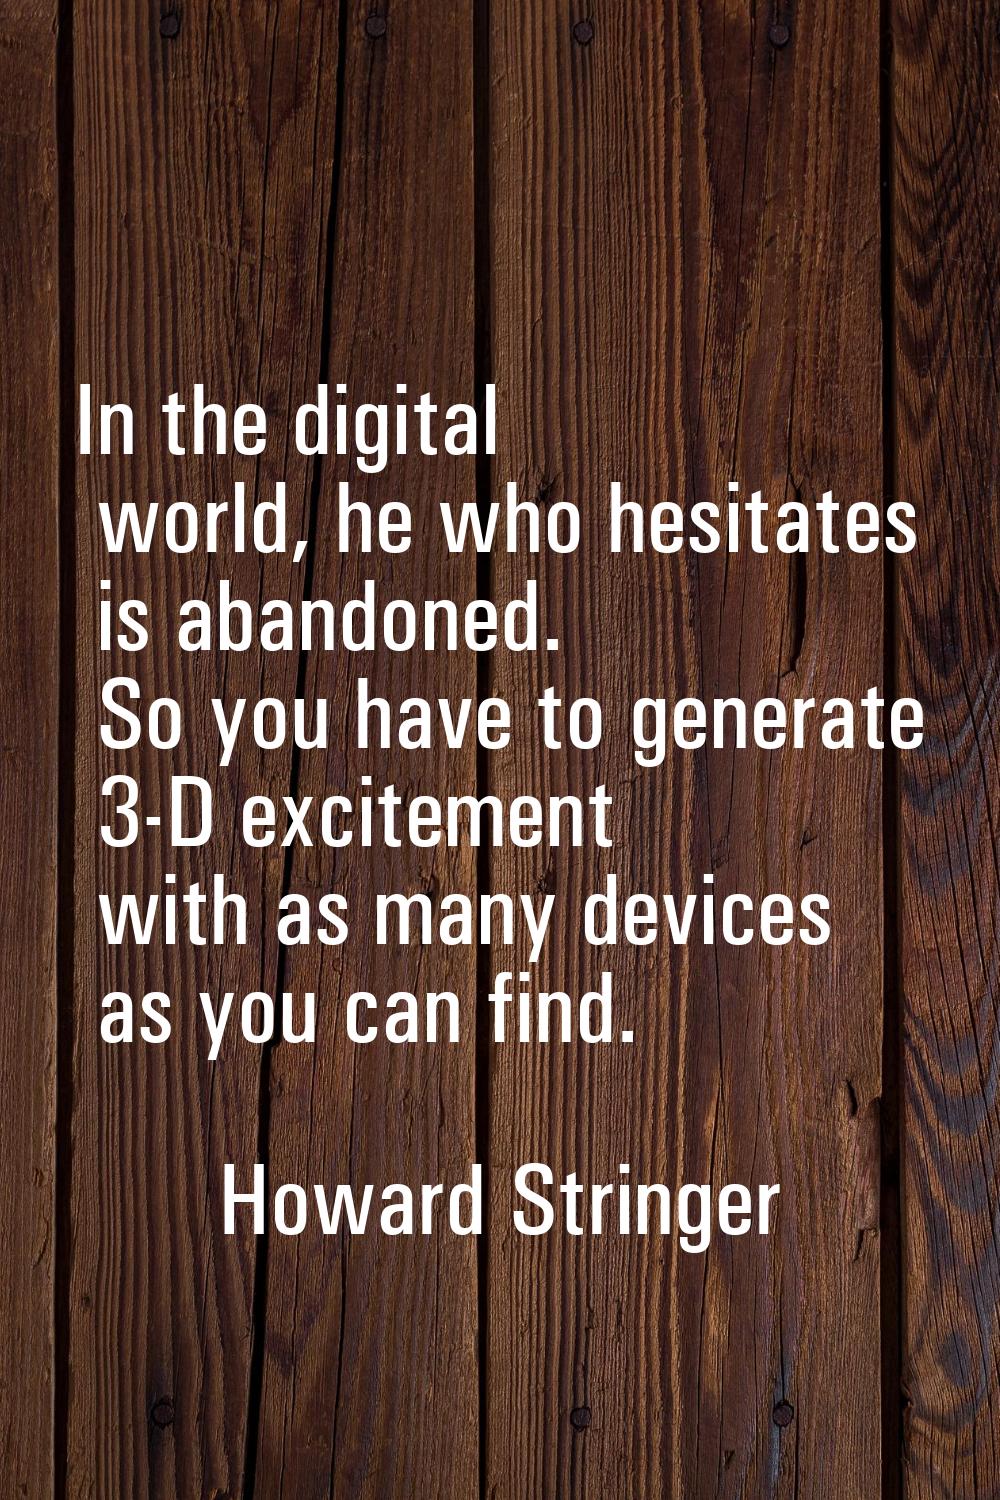 In the digital world, he who hesitates is abandoned. So you have to generate 3-D excitement with as